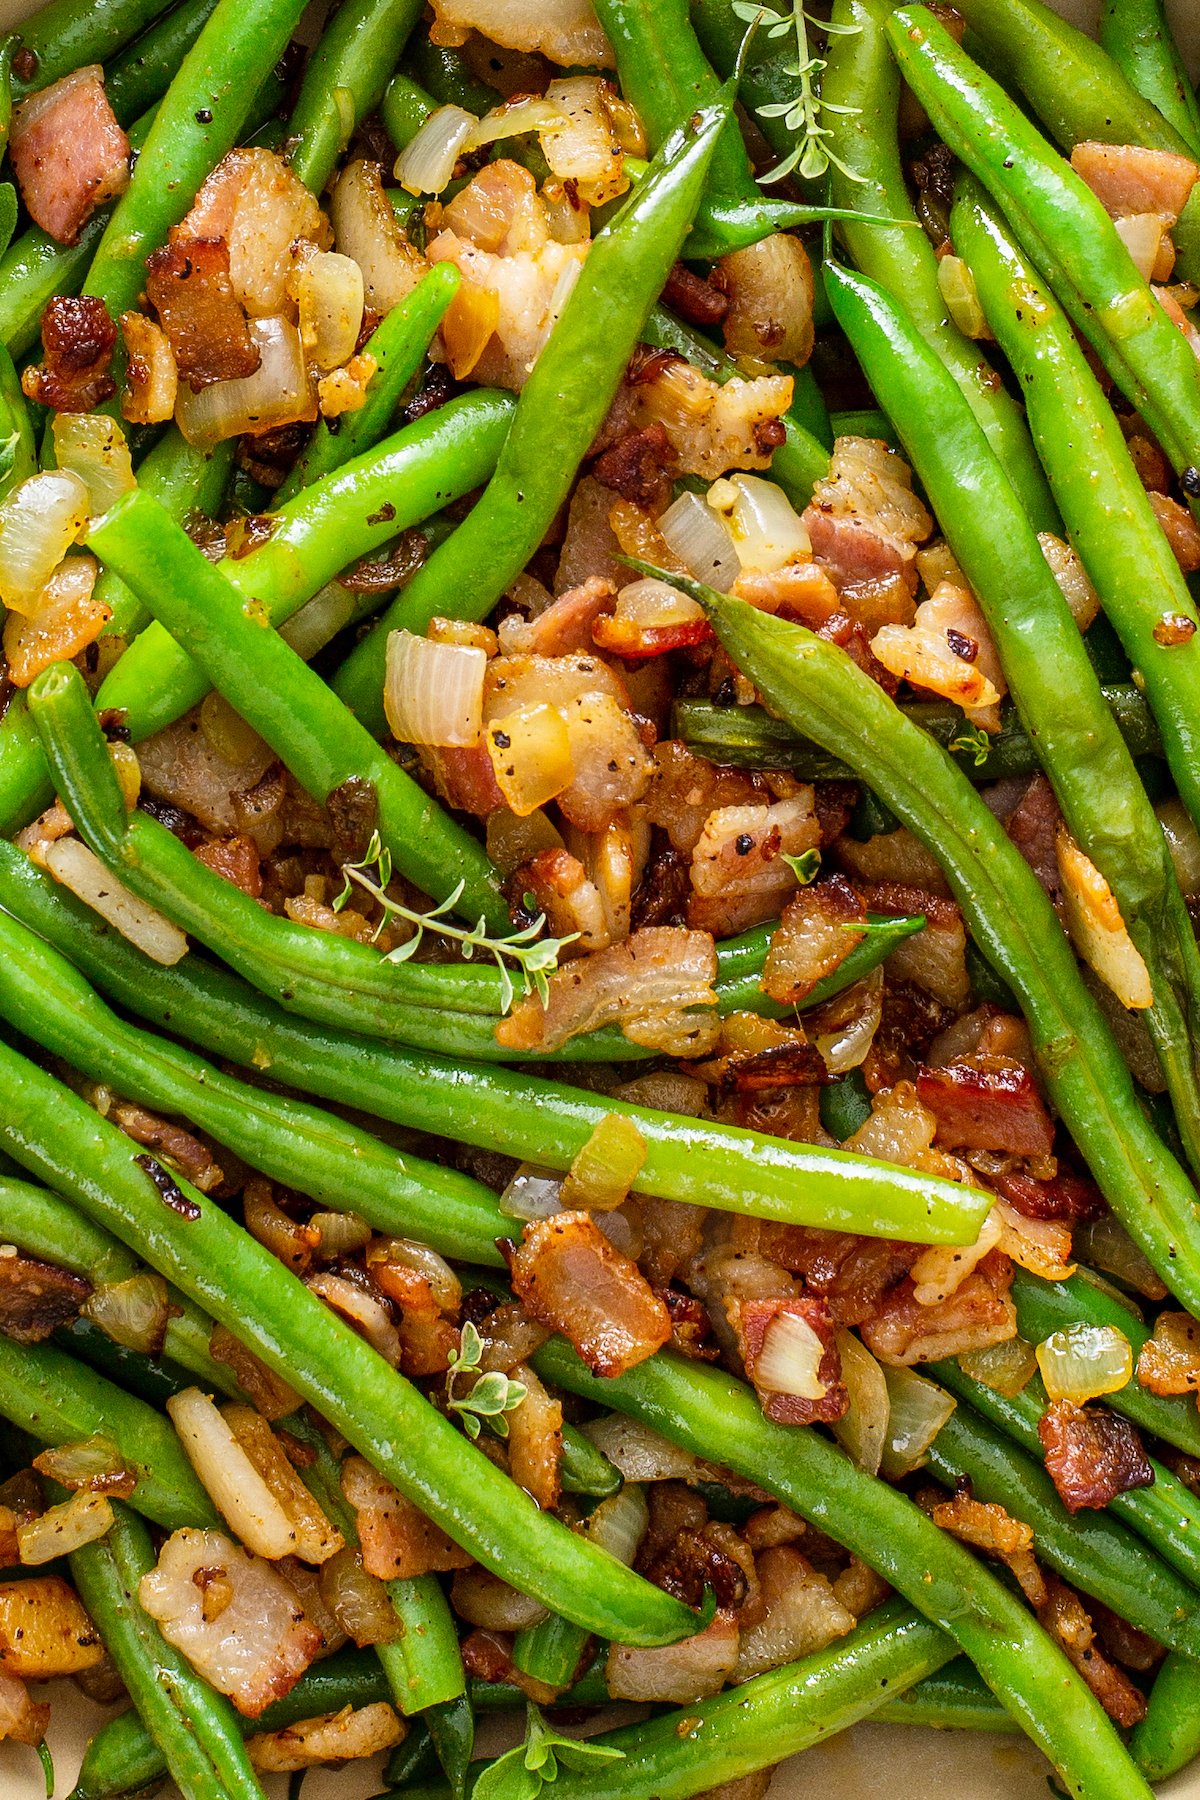 Cooked green beans with chopped cooked bacon and onions mixed in.